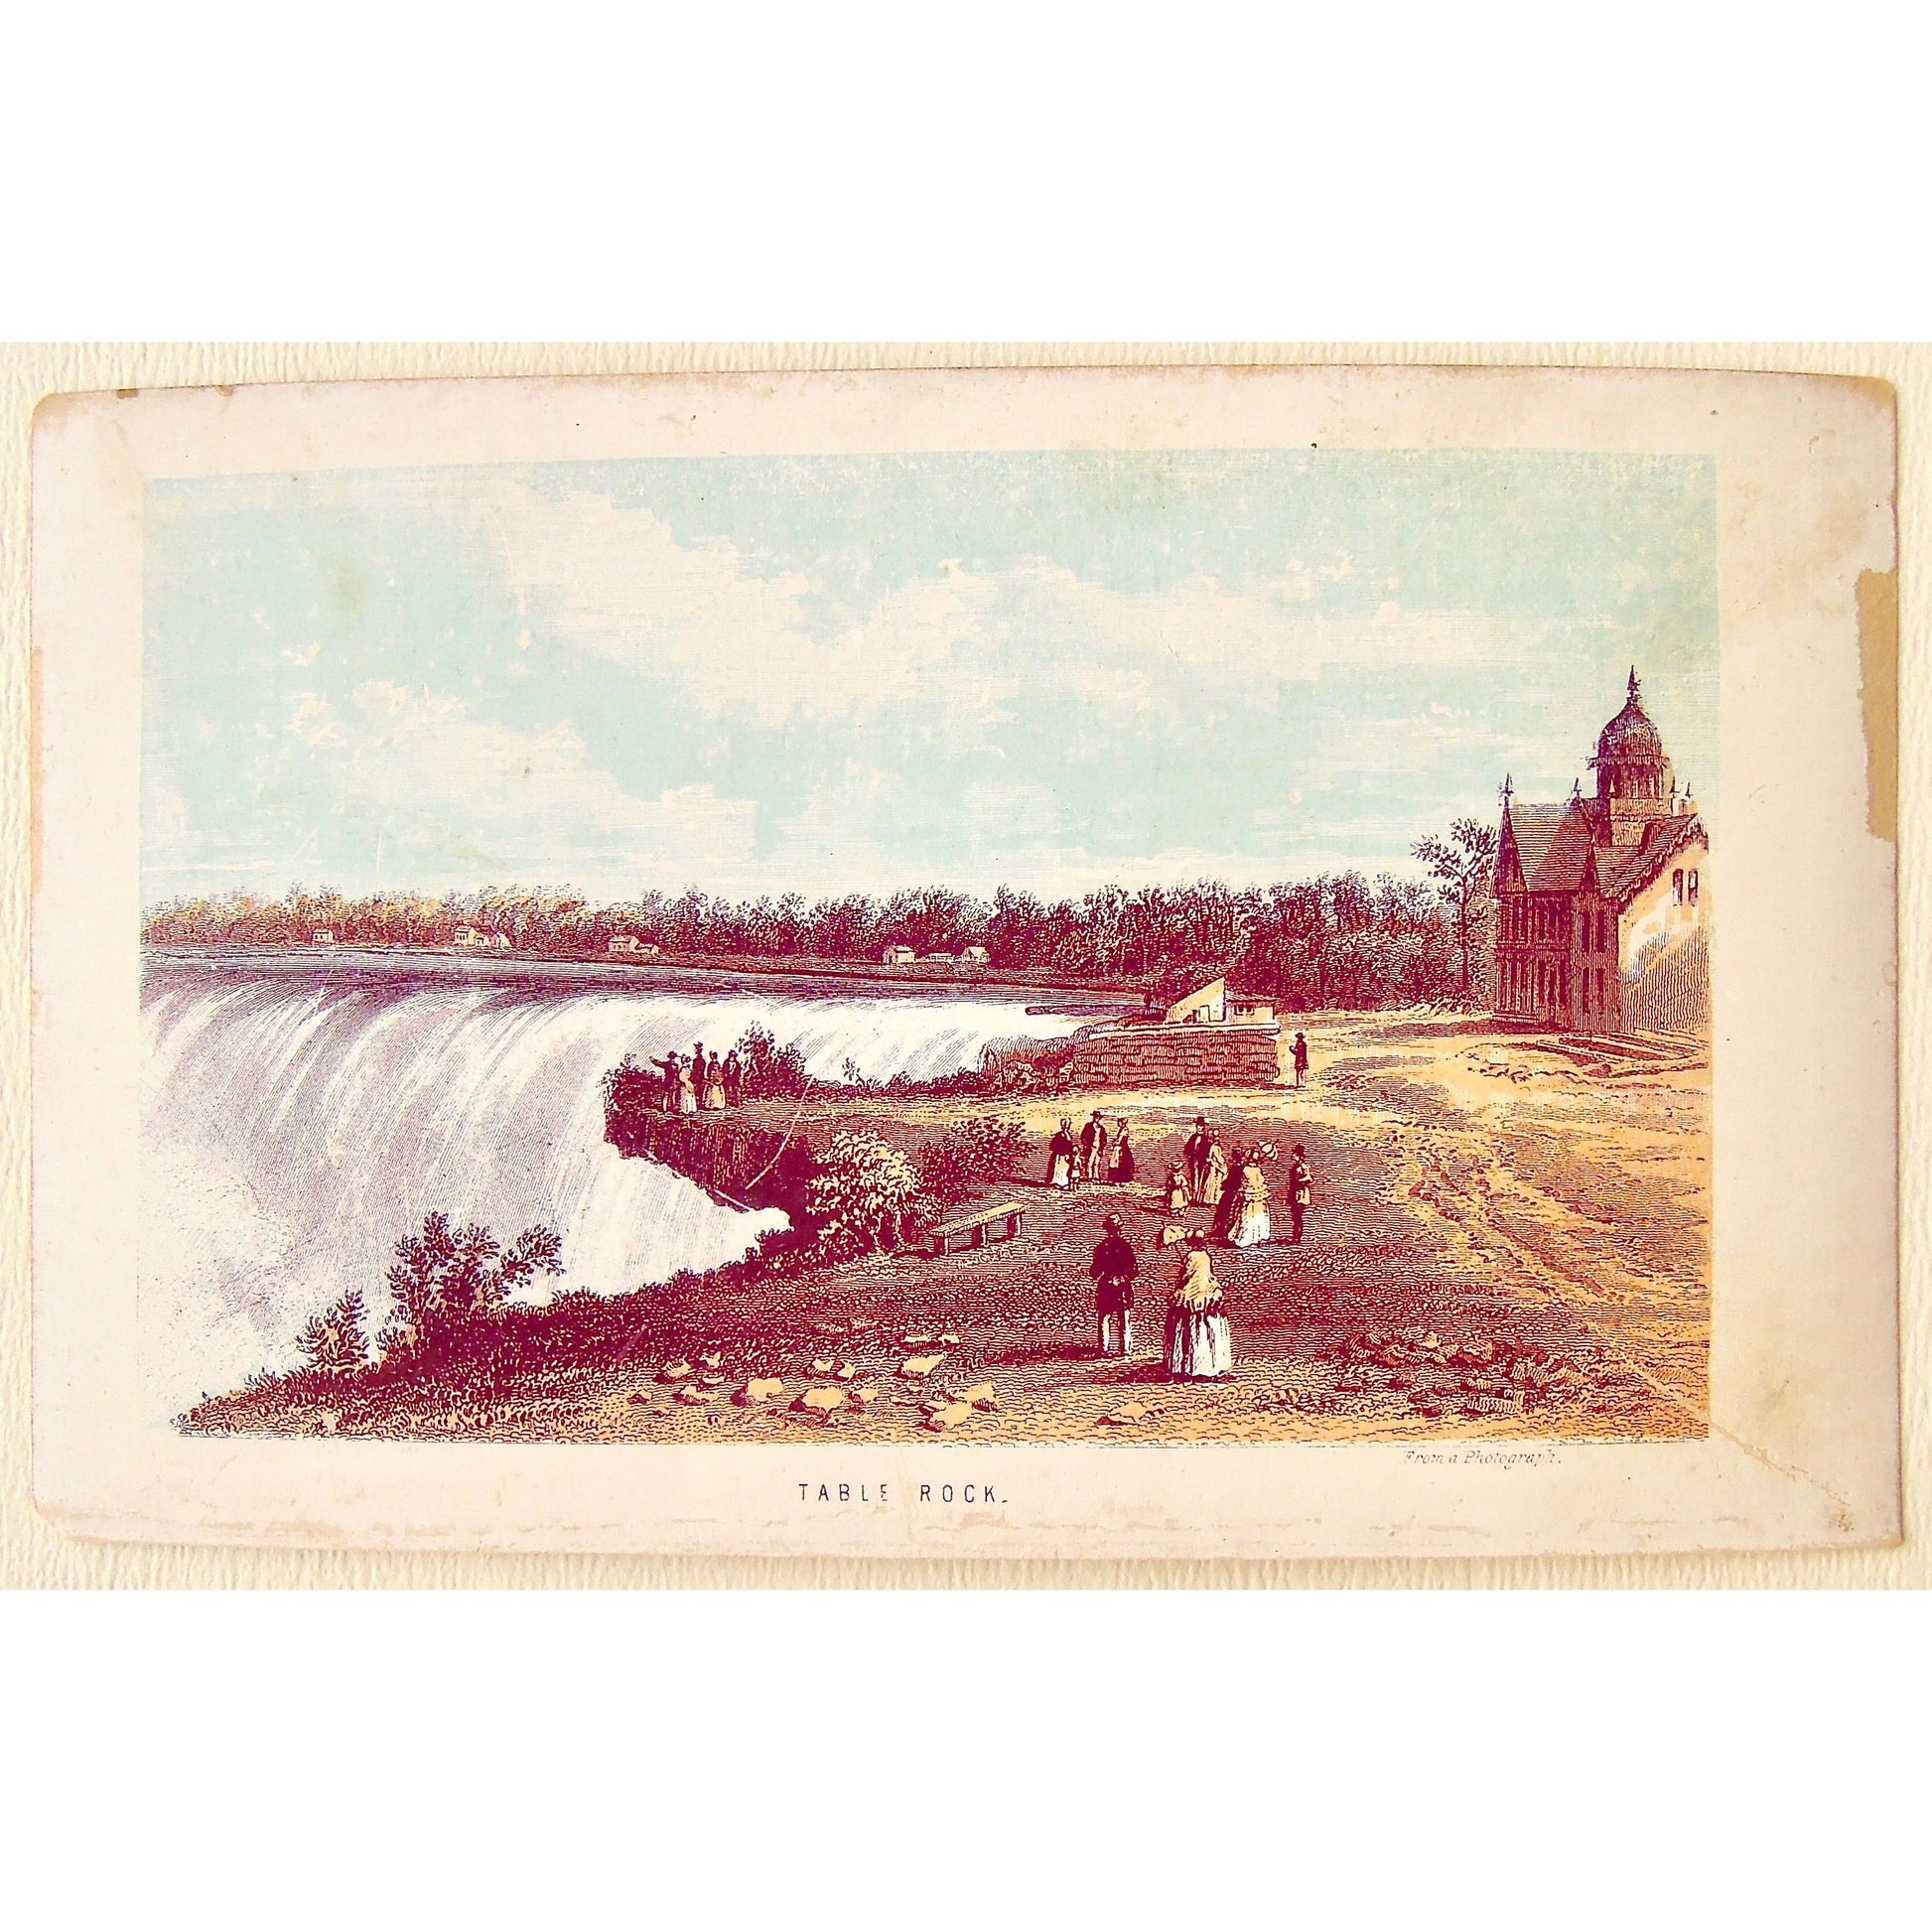 Original antique print in colour of Table Rock, Niagara Falls, from a Photograph for sale by Victoria Cooper Antique prints 